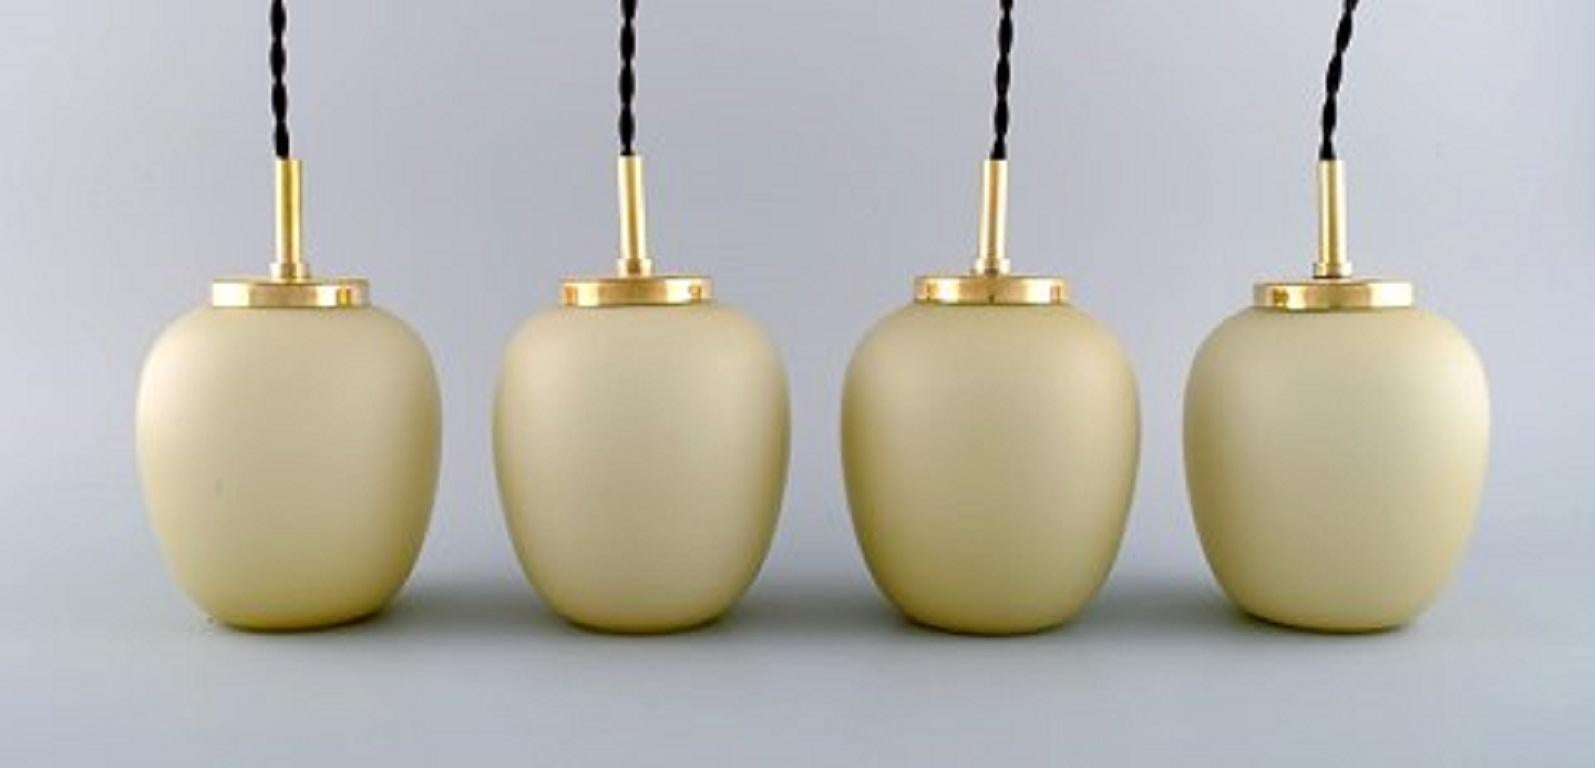 Mid-20th Century Danish Design, Four China Lamps or Pendants Made of Matt Opal Glass, 1960s For Sale